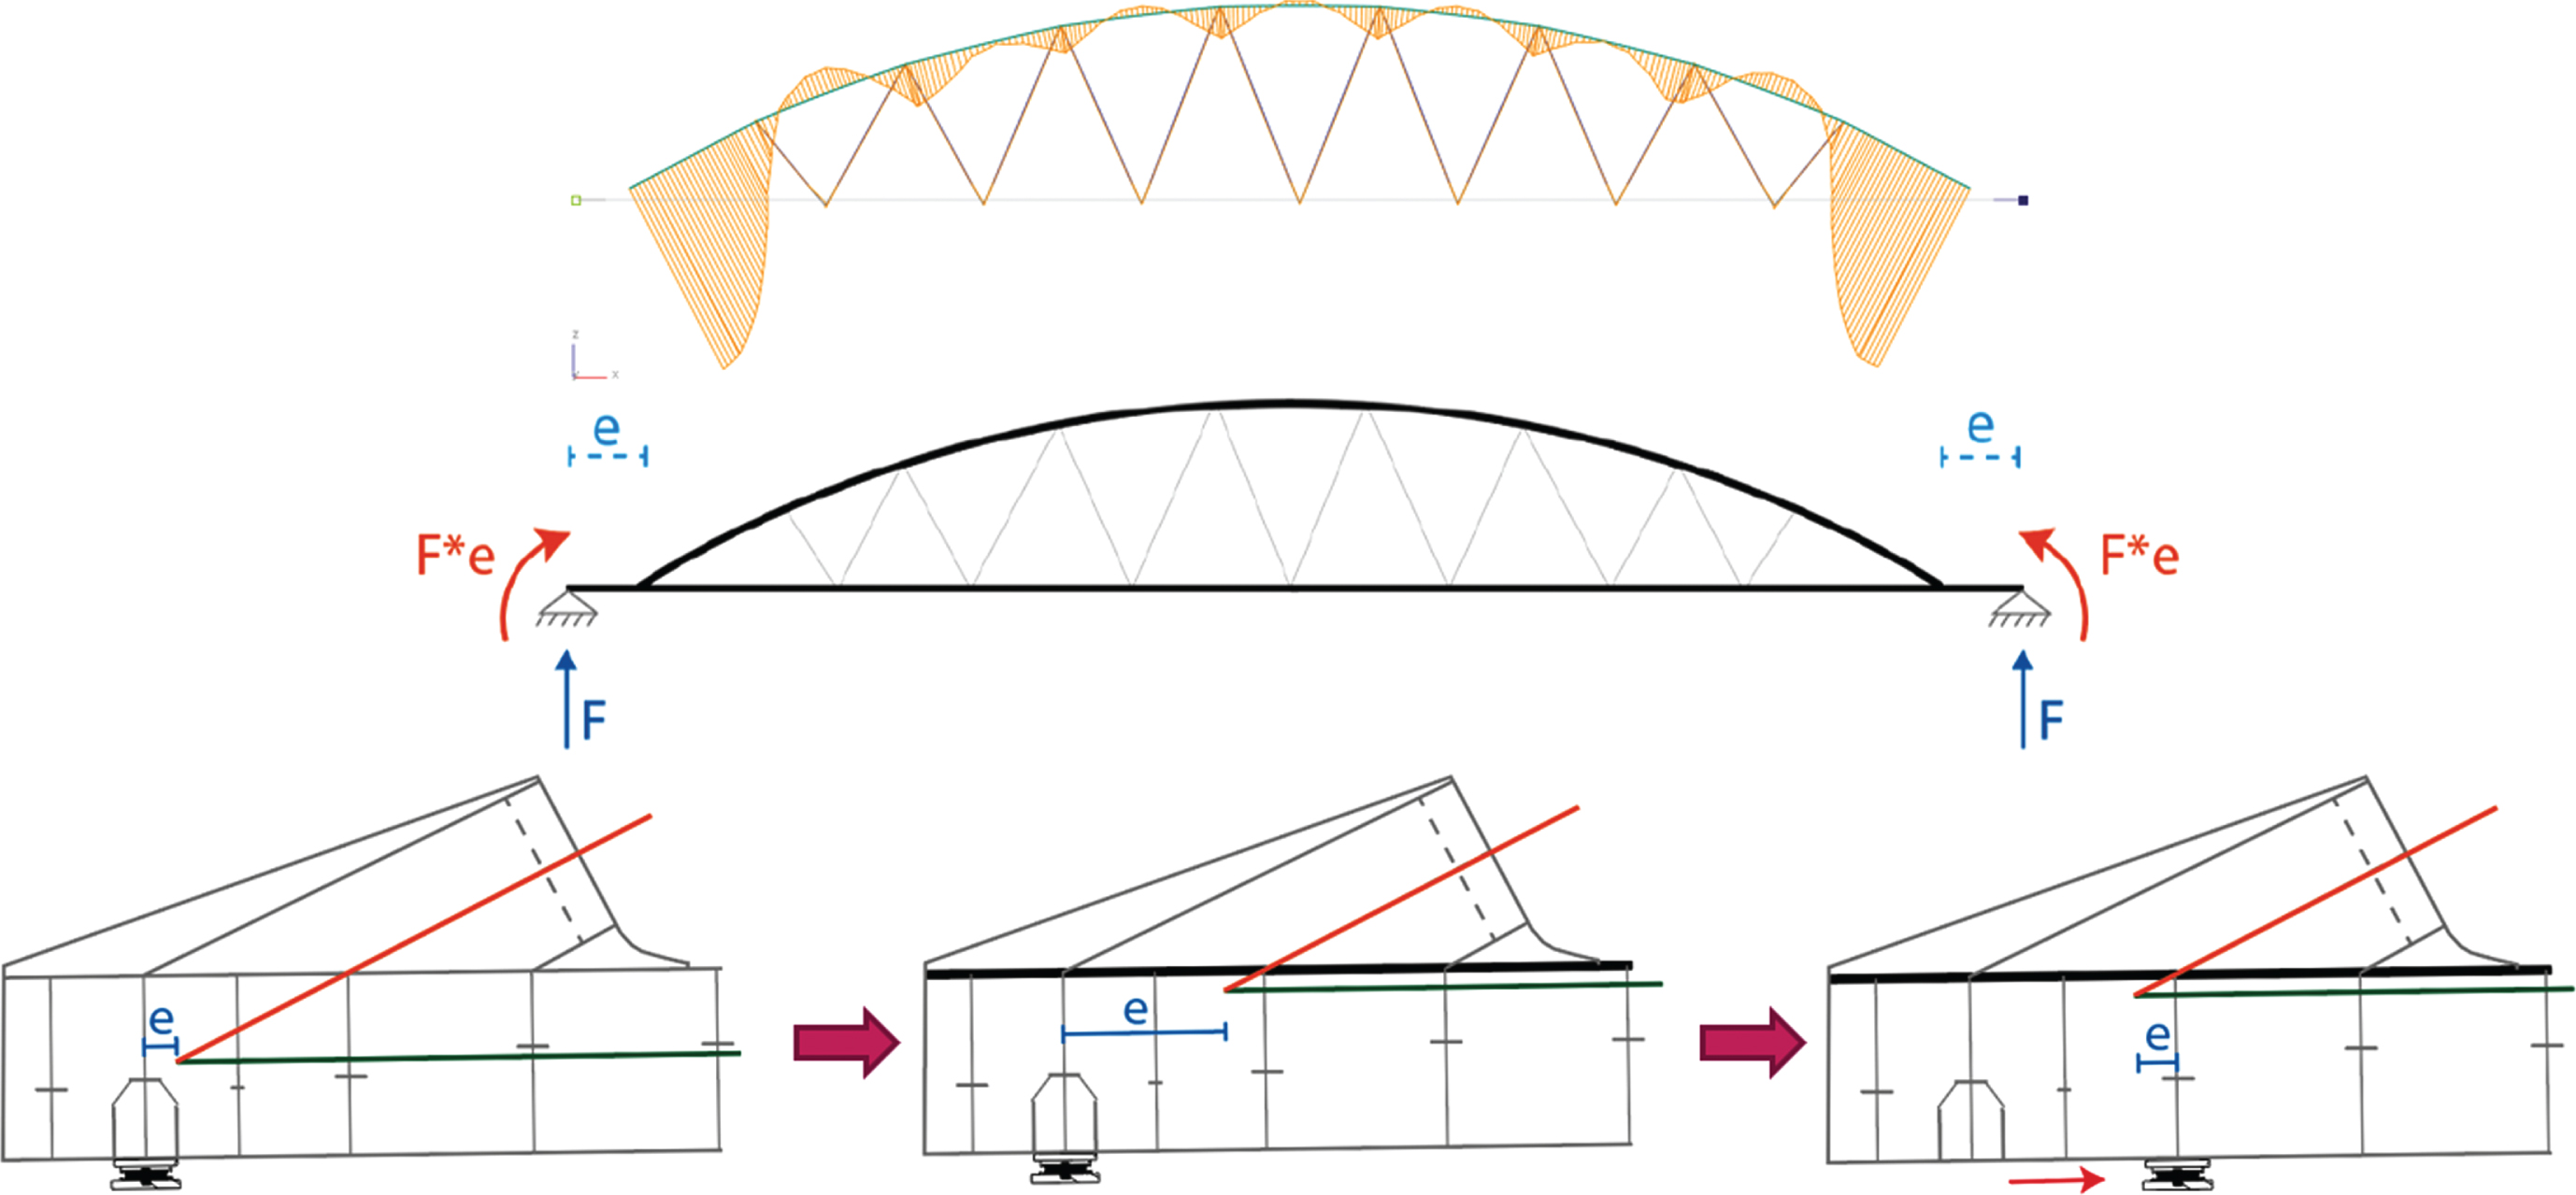 Bearing eccentricity due to new deck. Top diagram represents the bending moment due to bearing eccentricity. Bottom diagrams represent resulting thrust/tension lines for the original situation, the increased eccentricity of the strengthened situation with bearings at the original position and the reduction in eccentricity through repositioning of the bearings.